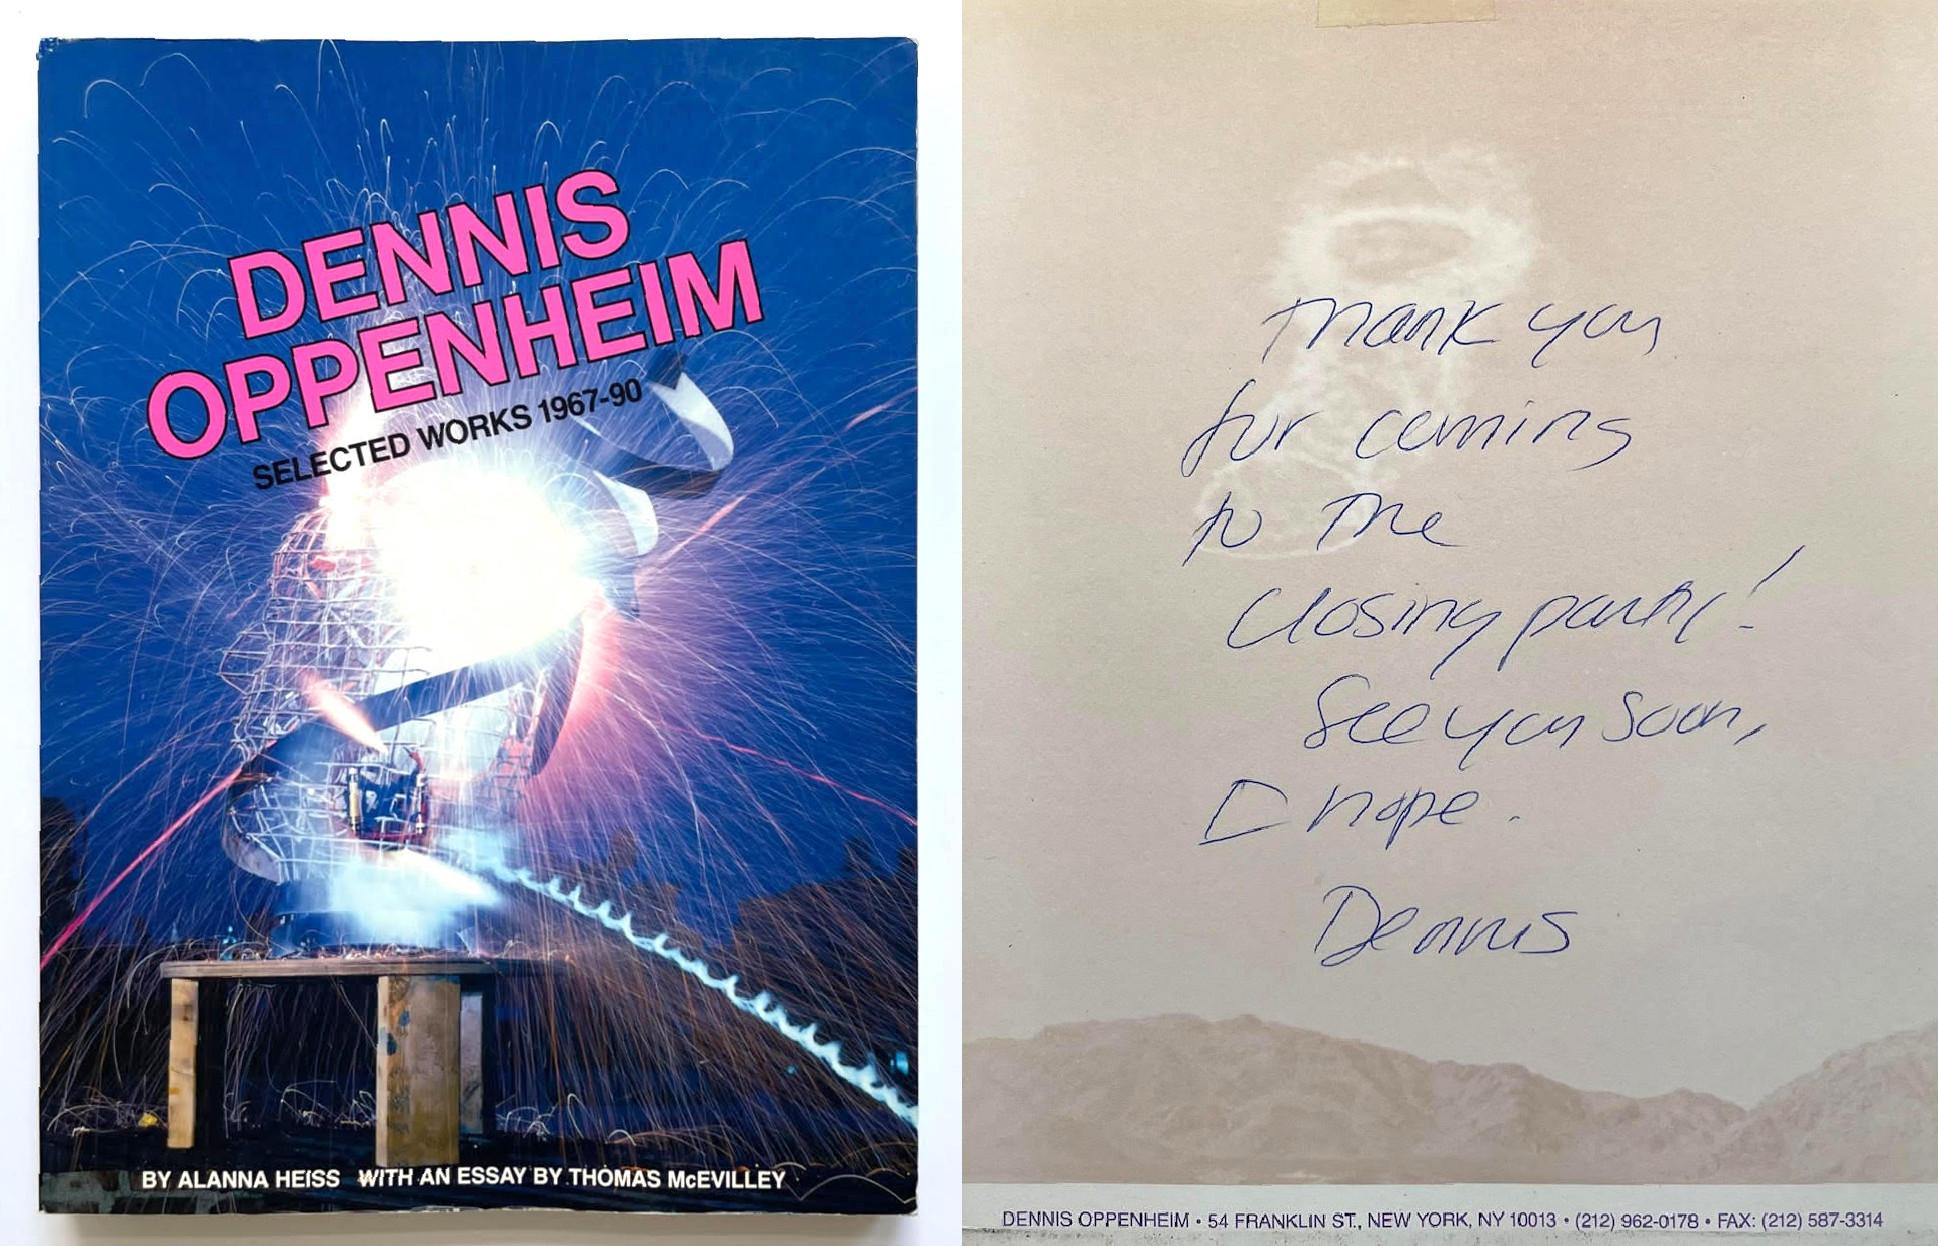 Book: Selected Works 1967-90 And the Mind Grew Fingers (and hand written letter) - Art by Dennis Oppenheim